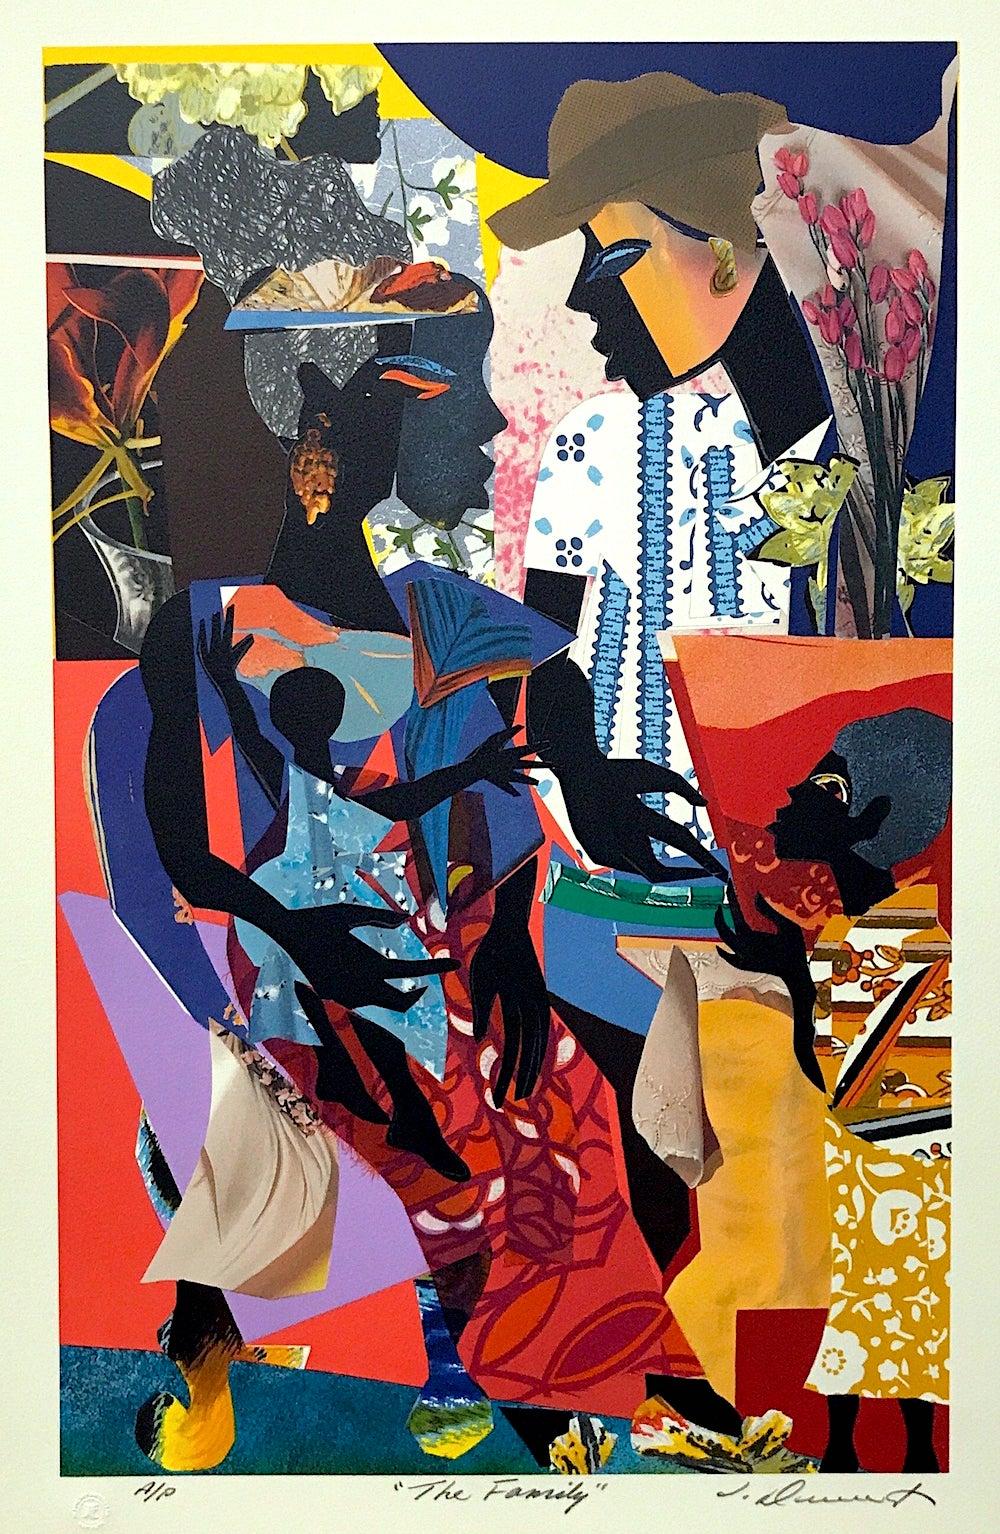 THE FAMILY Signed Lithograph, Black Family Portrait, Collage, African American  - Print by James Denmark